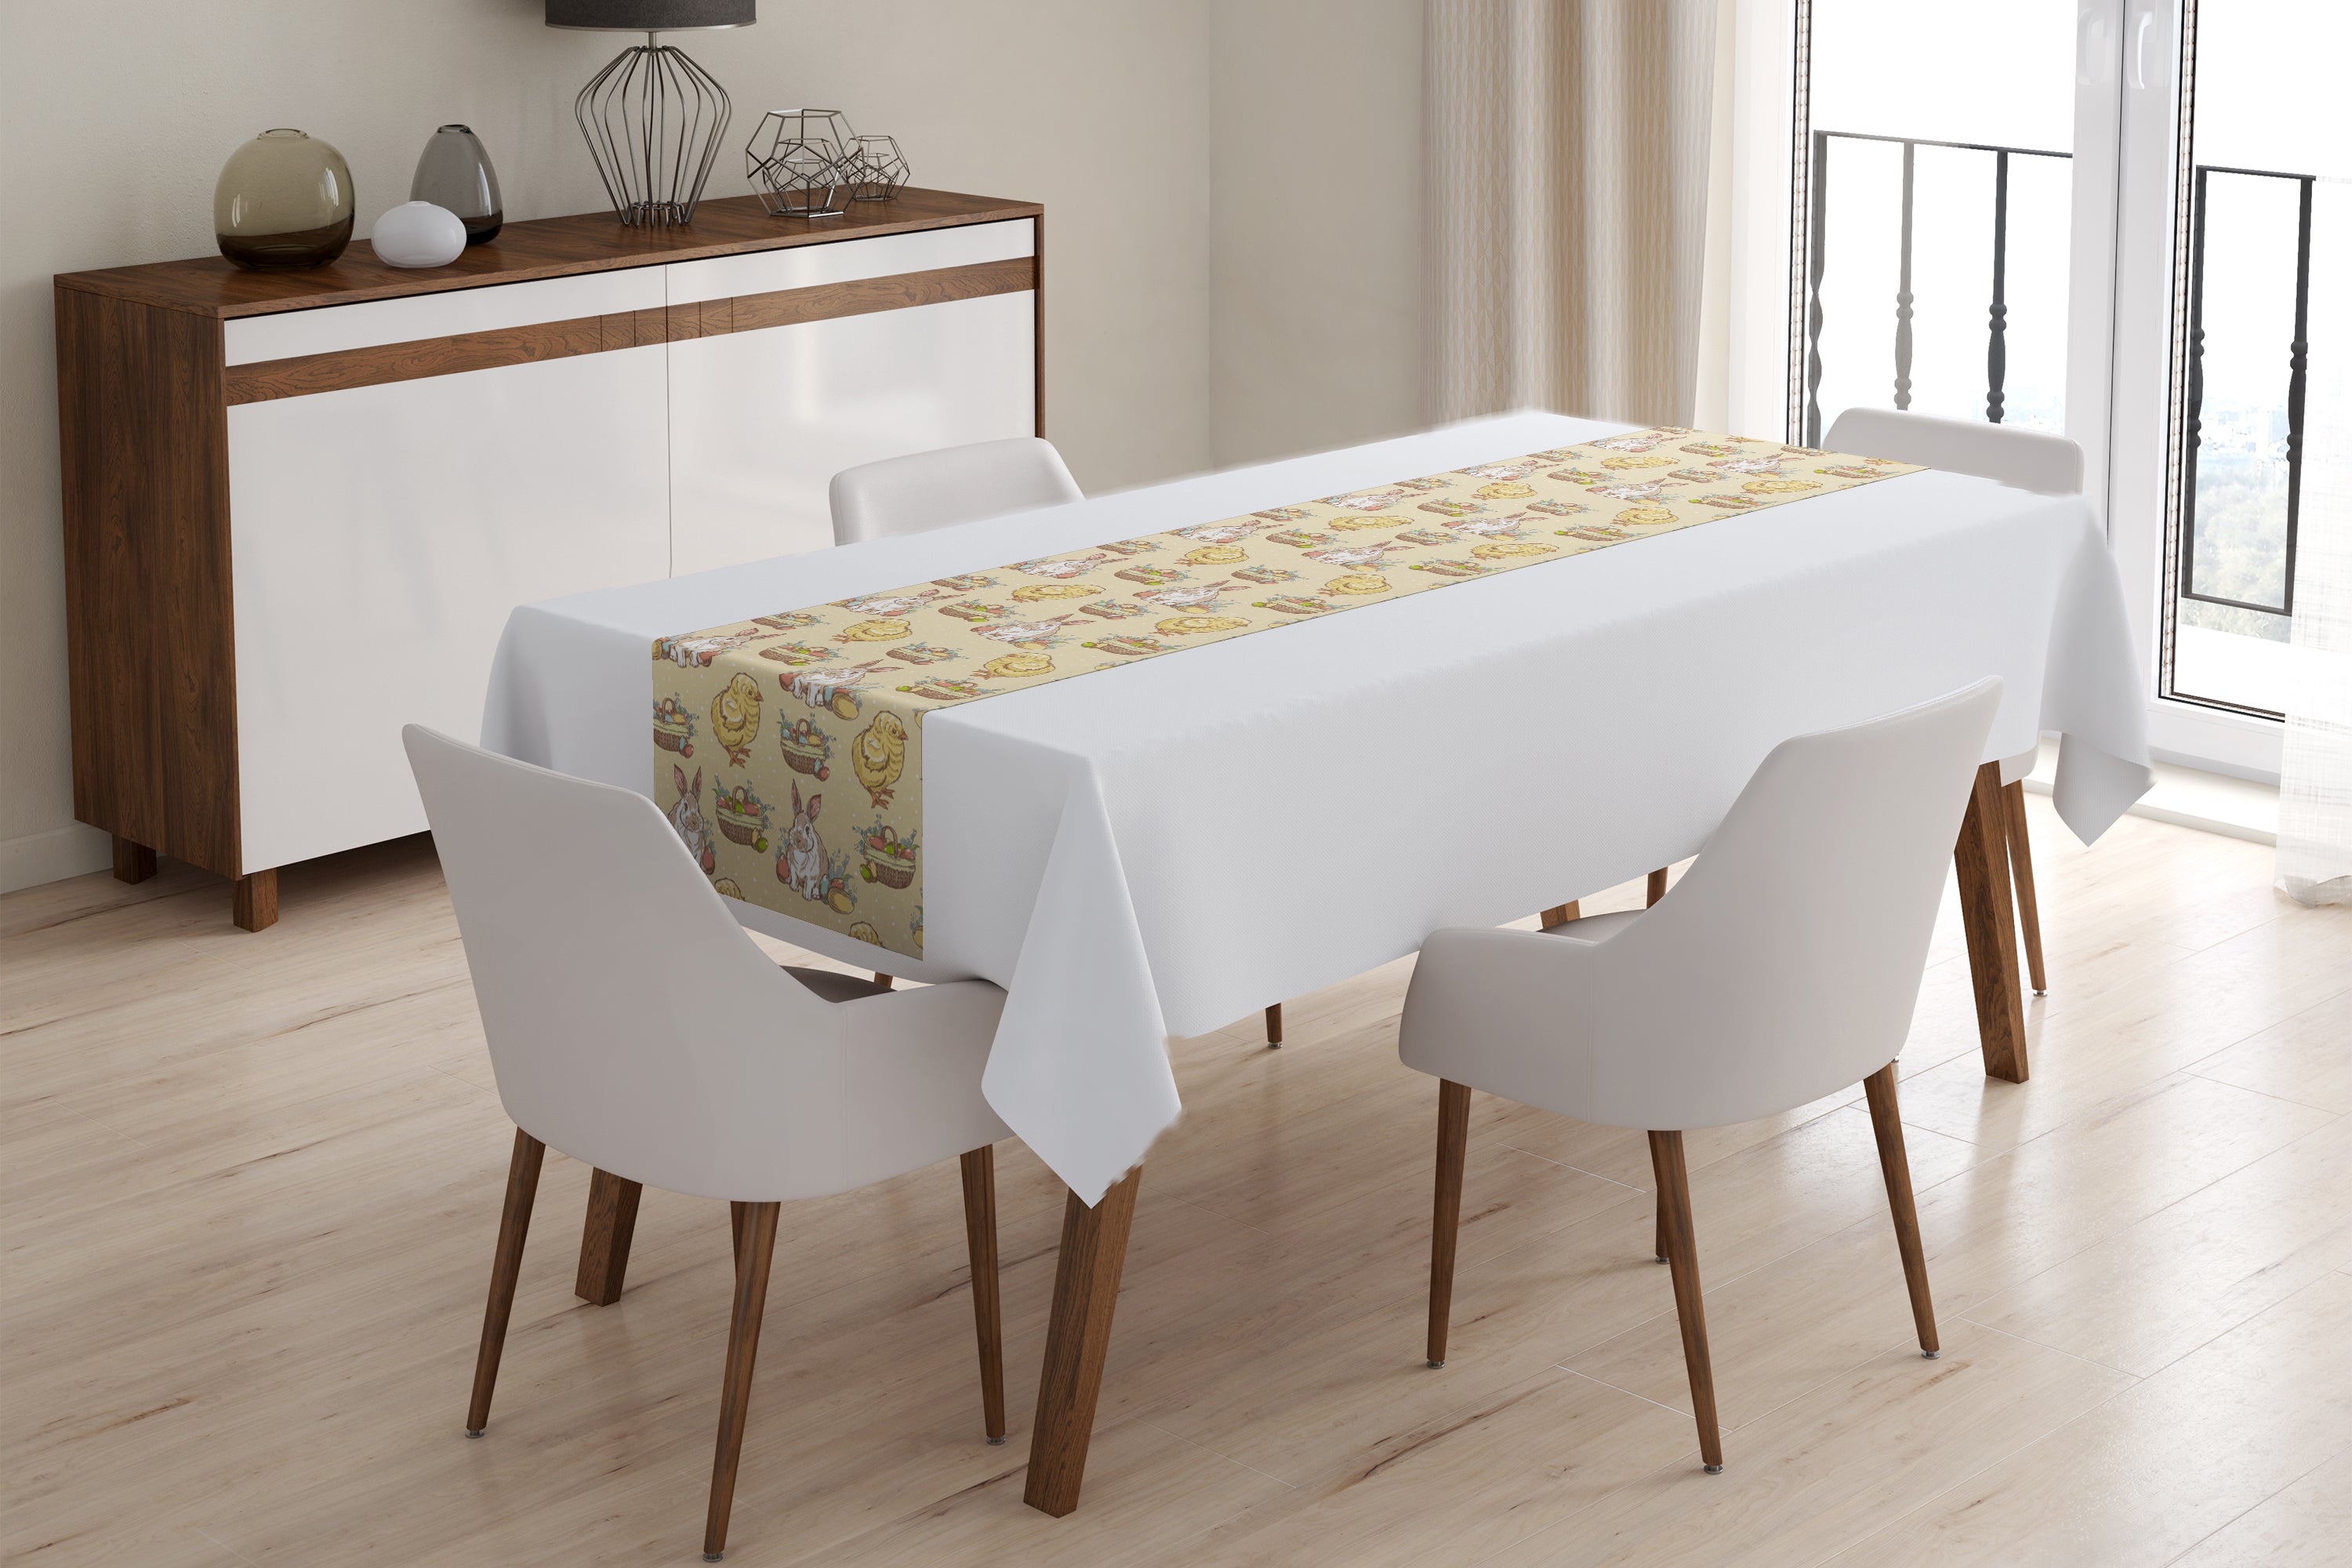 Table Runner Easter Chickens and Rabbits - Wellmira